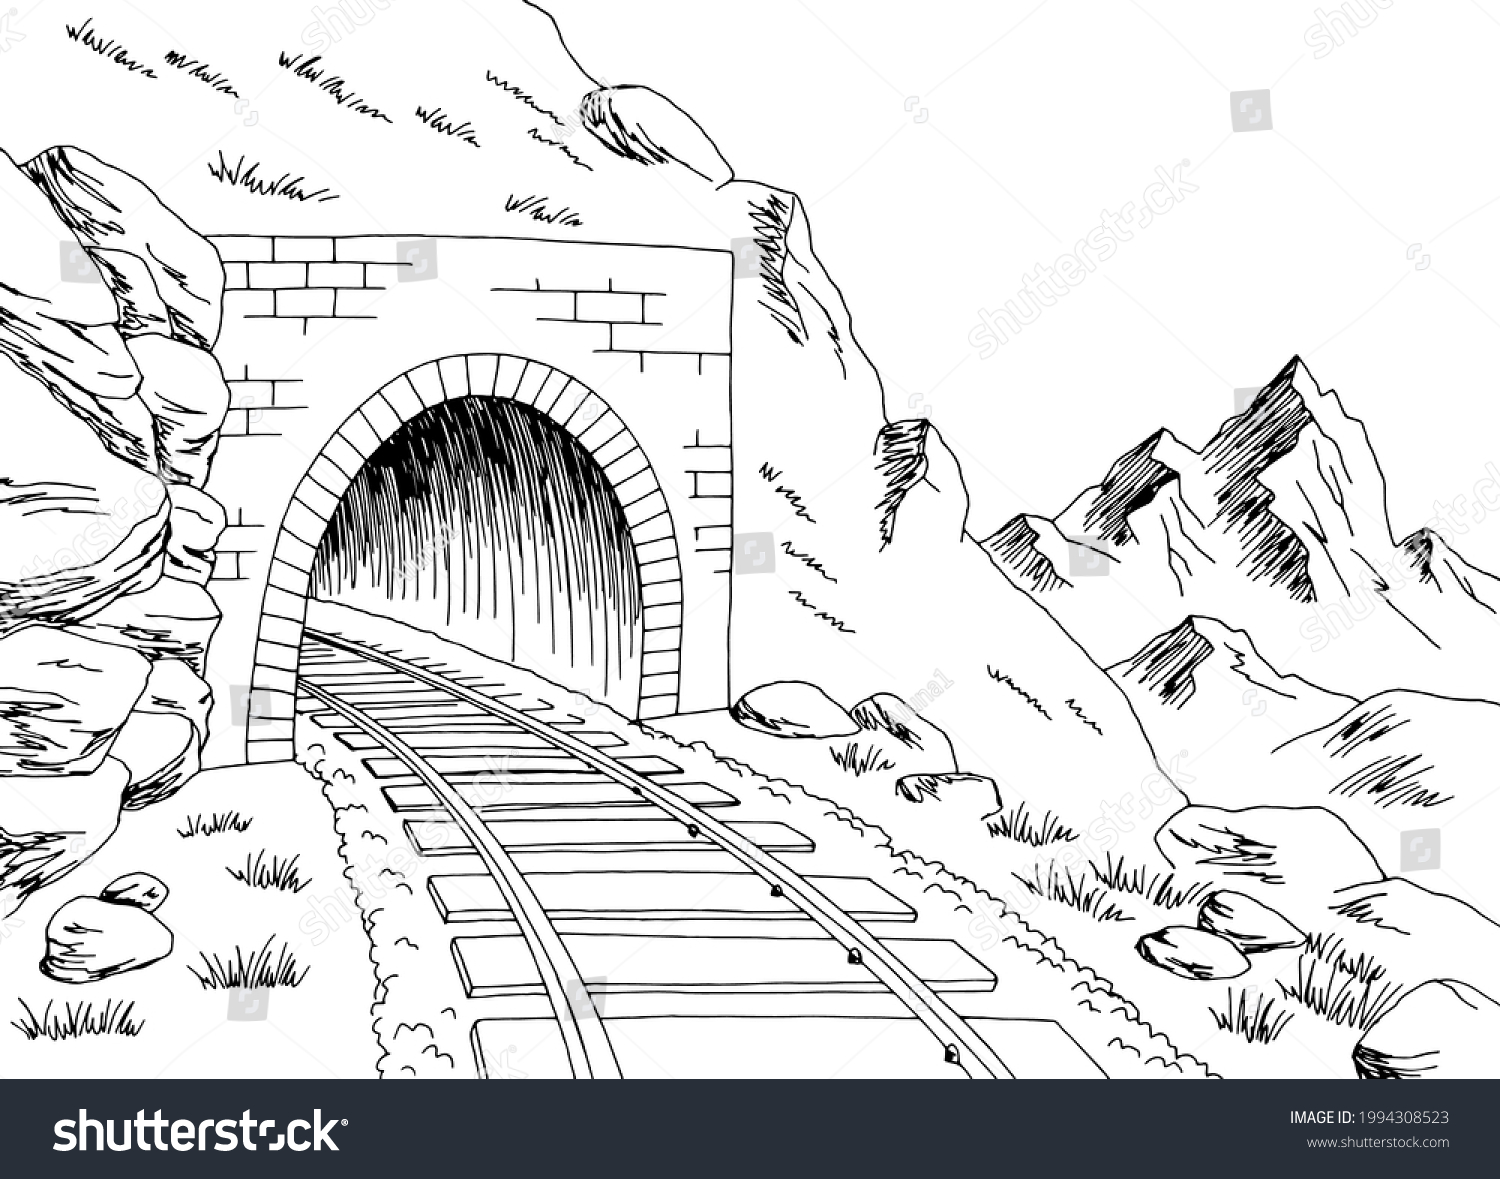 67,708 Curve tunnel Images, Stock Photos & Vectors | Shutterstock